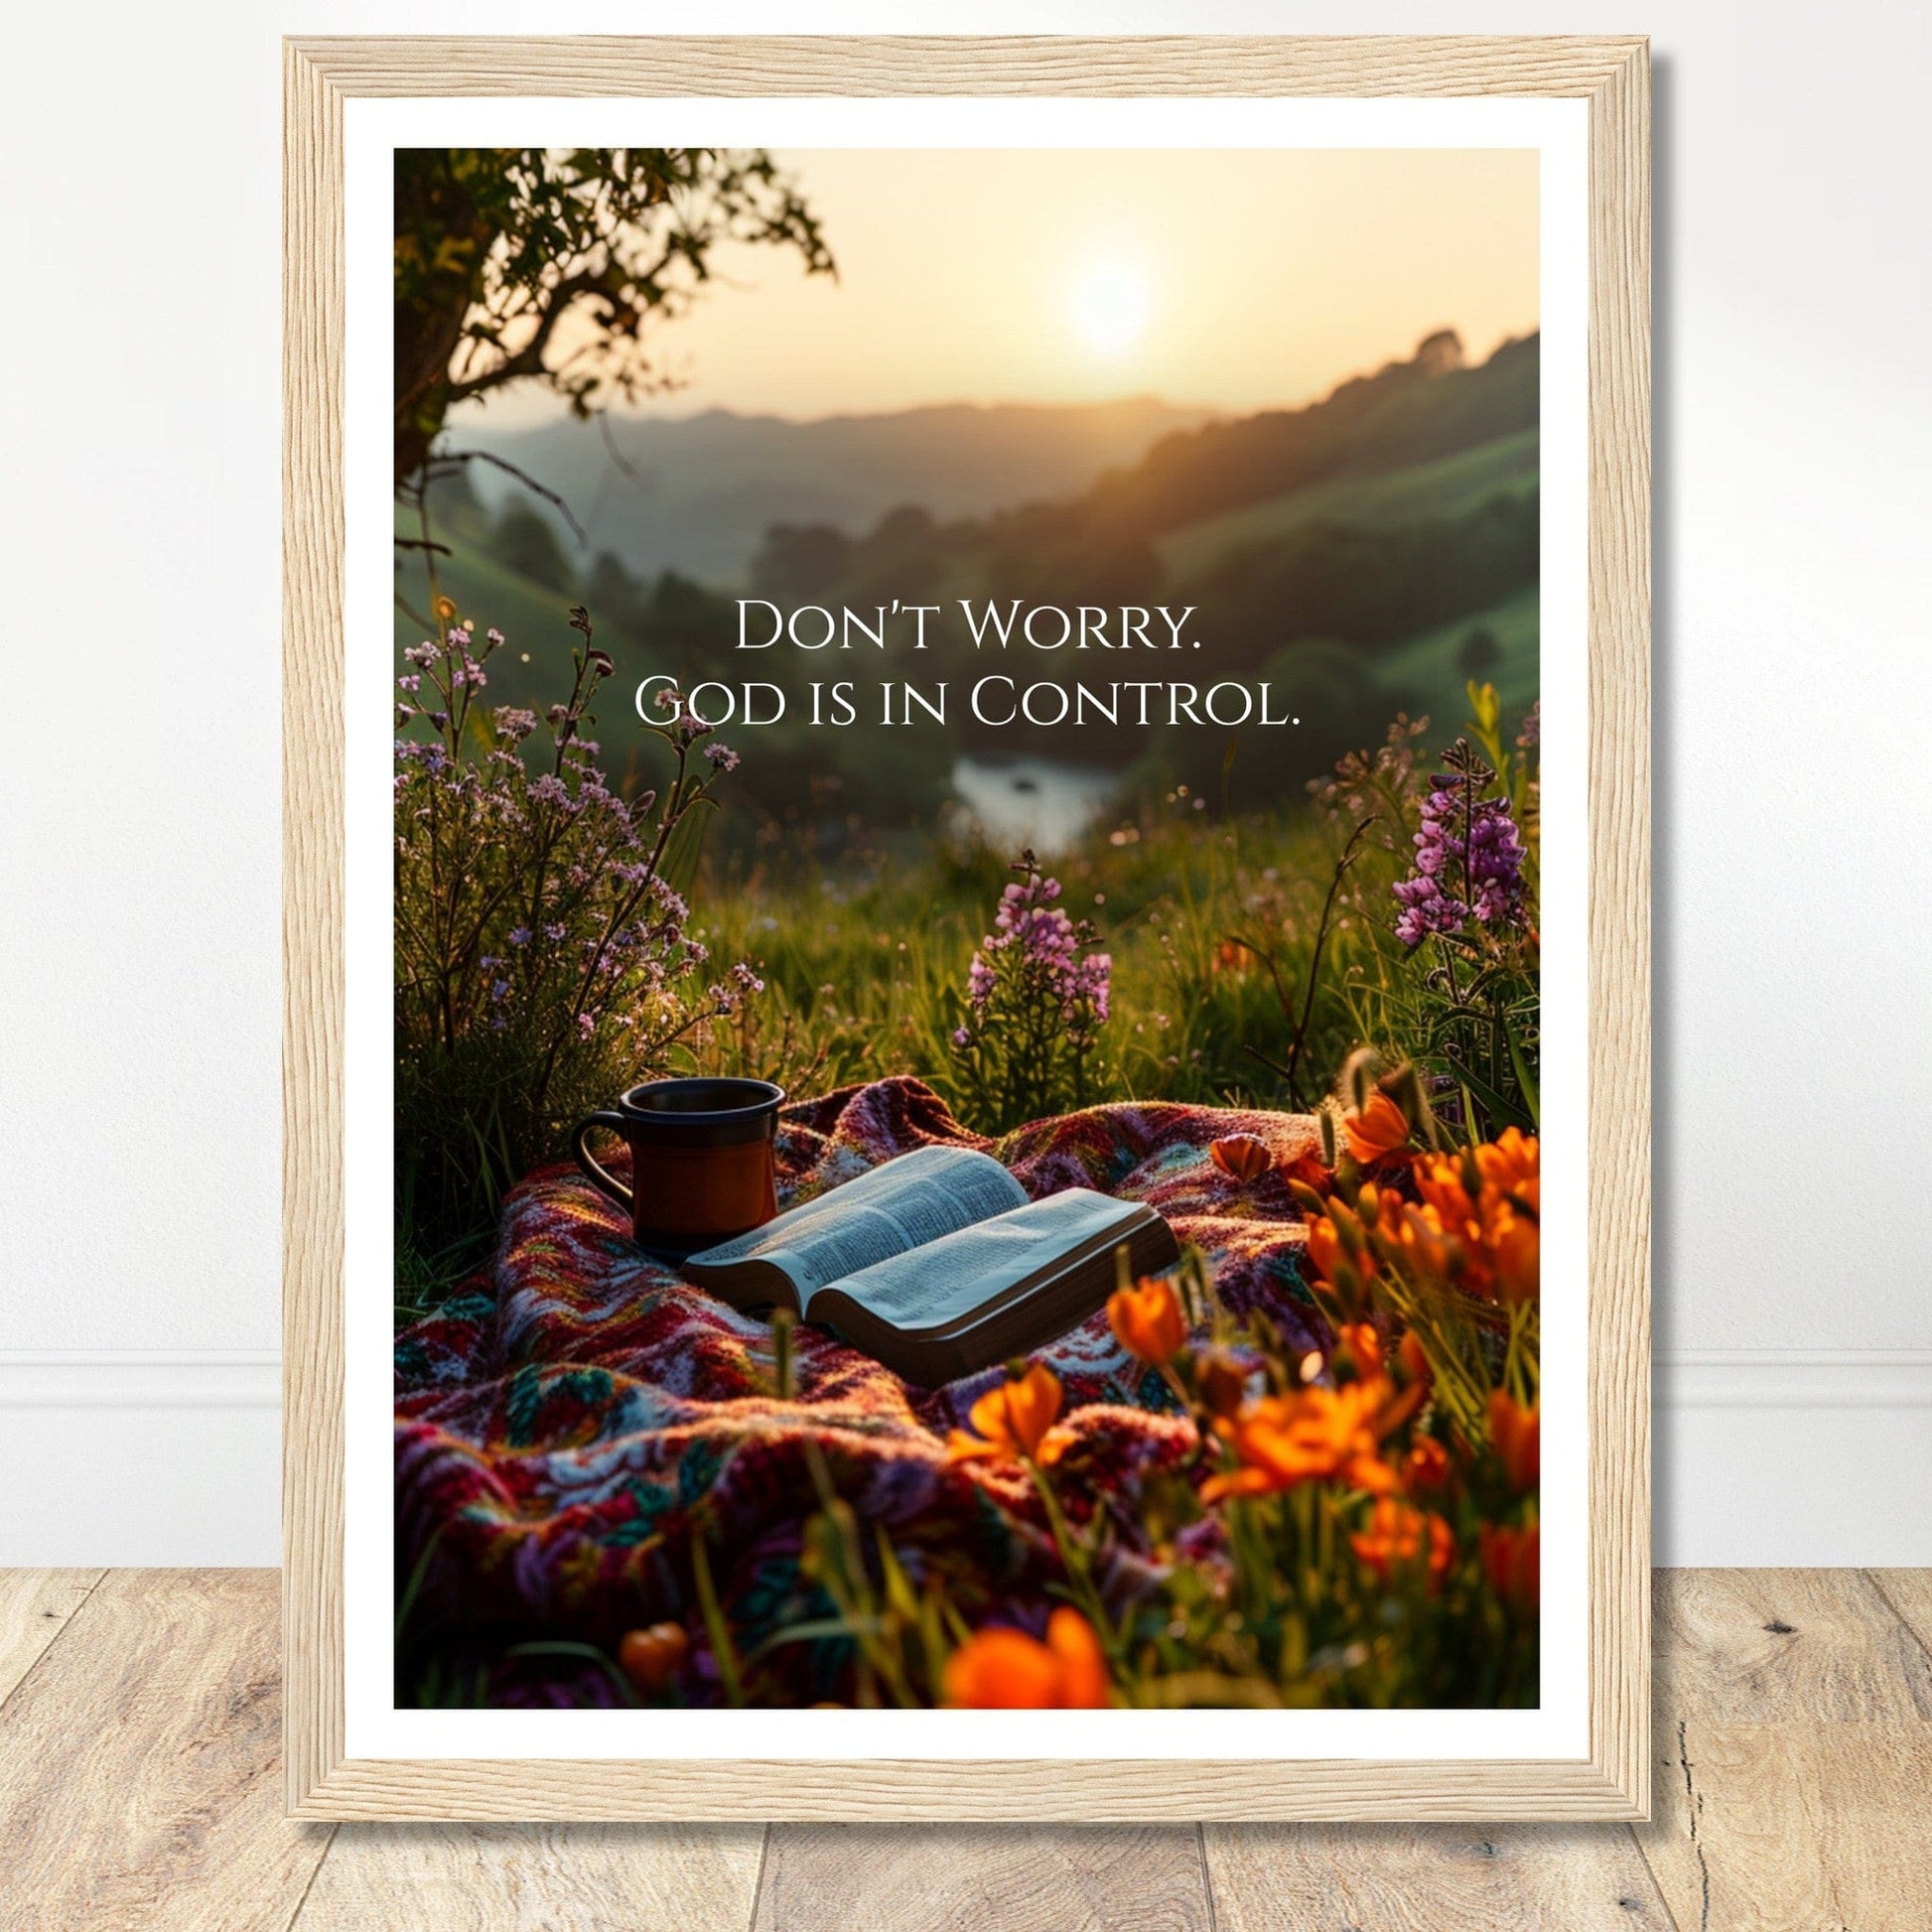 Coffee With My Father Print Material 30x40 cm / 12x16″ / Wood frame Premium Matte Paper Wooden Framed Poster